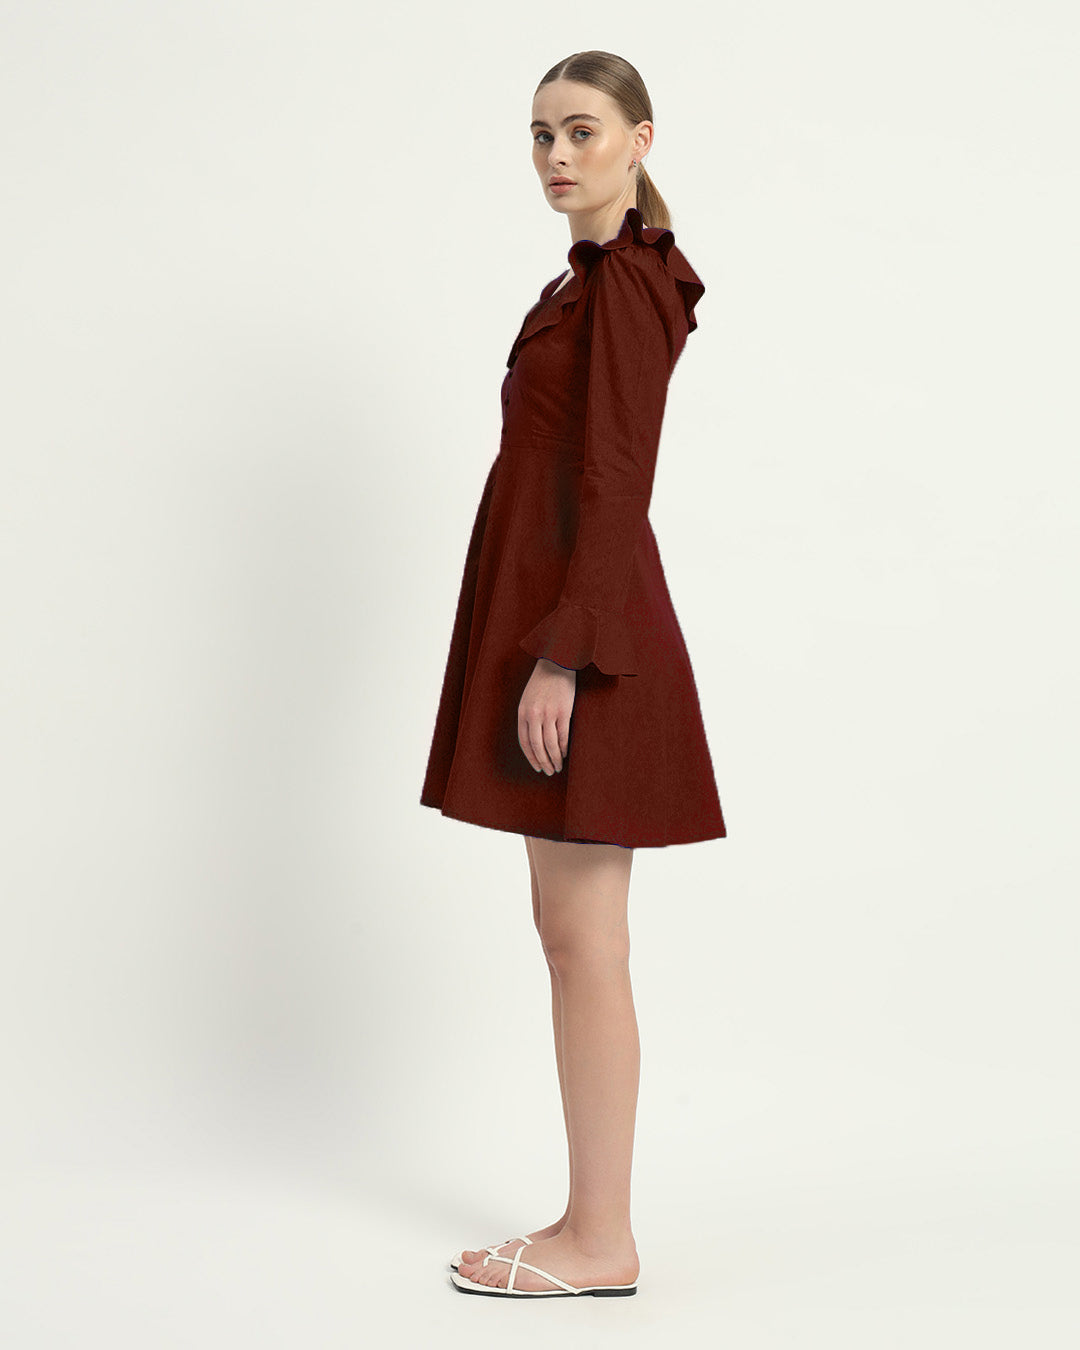 The Fredonia Rouge Cotton Dress